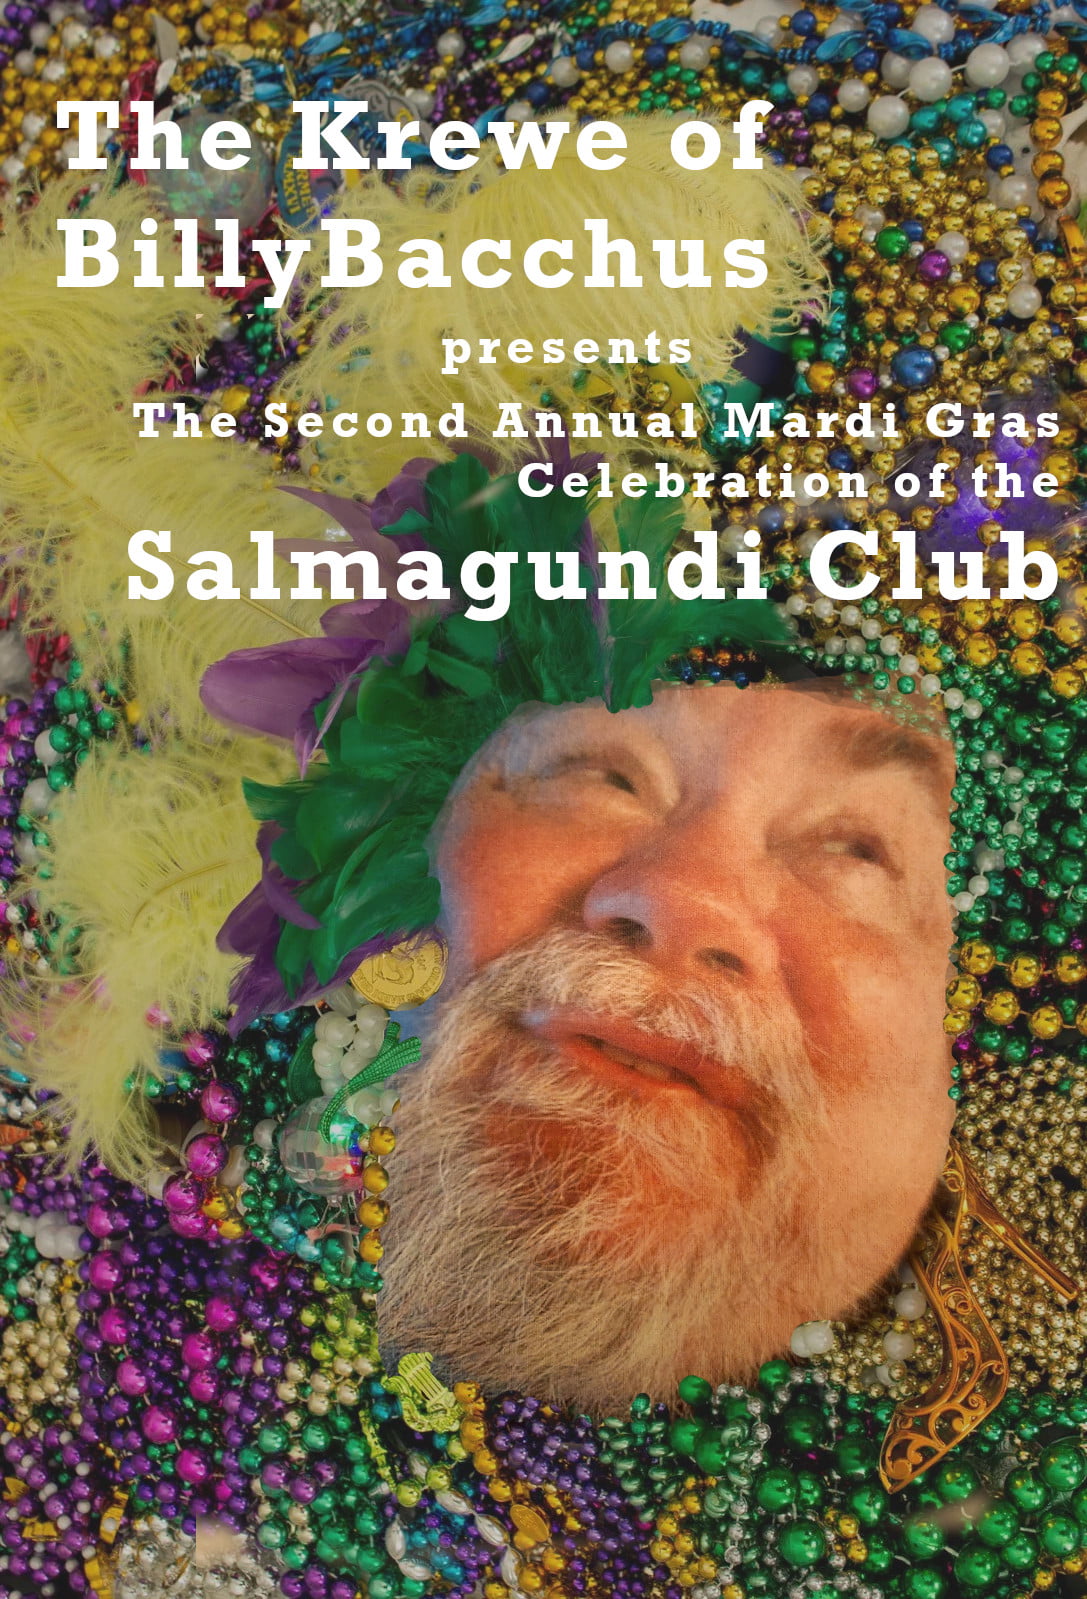 Bill Creevy's (recently deceased club member from New Orleans) head peaks out from a pile of beaded necklaces. Text reads, "The Krewe of BillyBacchus presents The Second Annual Mardi Gras Celebration of the Salmagundi Club".